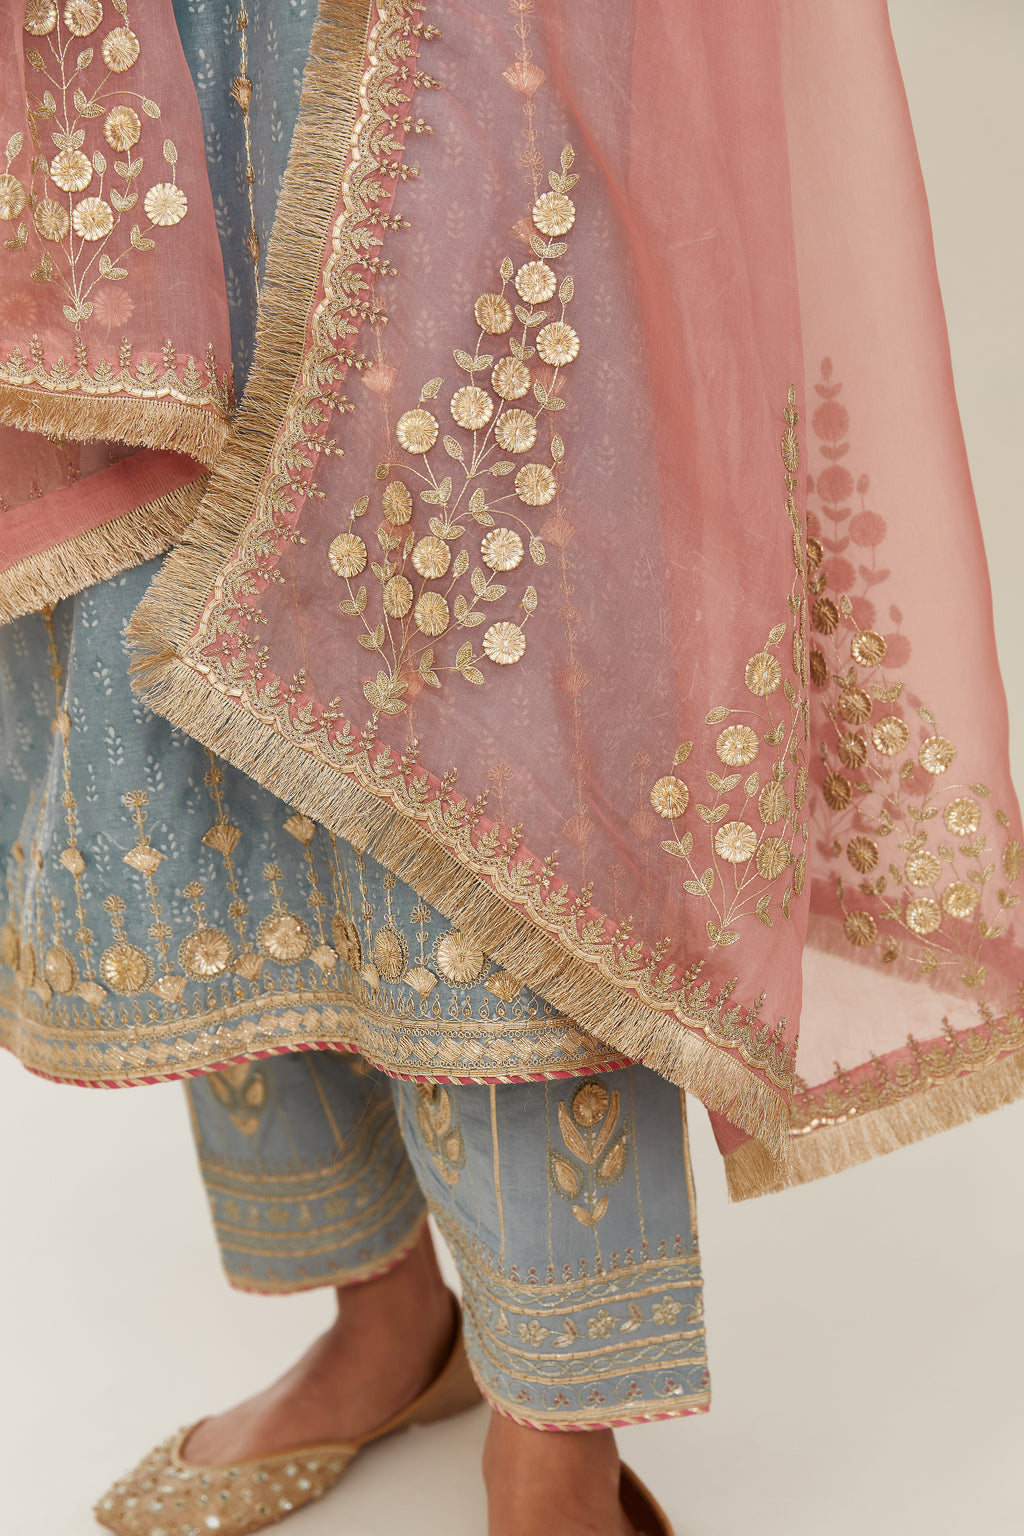 Pink silk organza dupatta with delicate gold zari and gota embroidery border running along all edges.